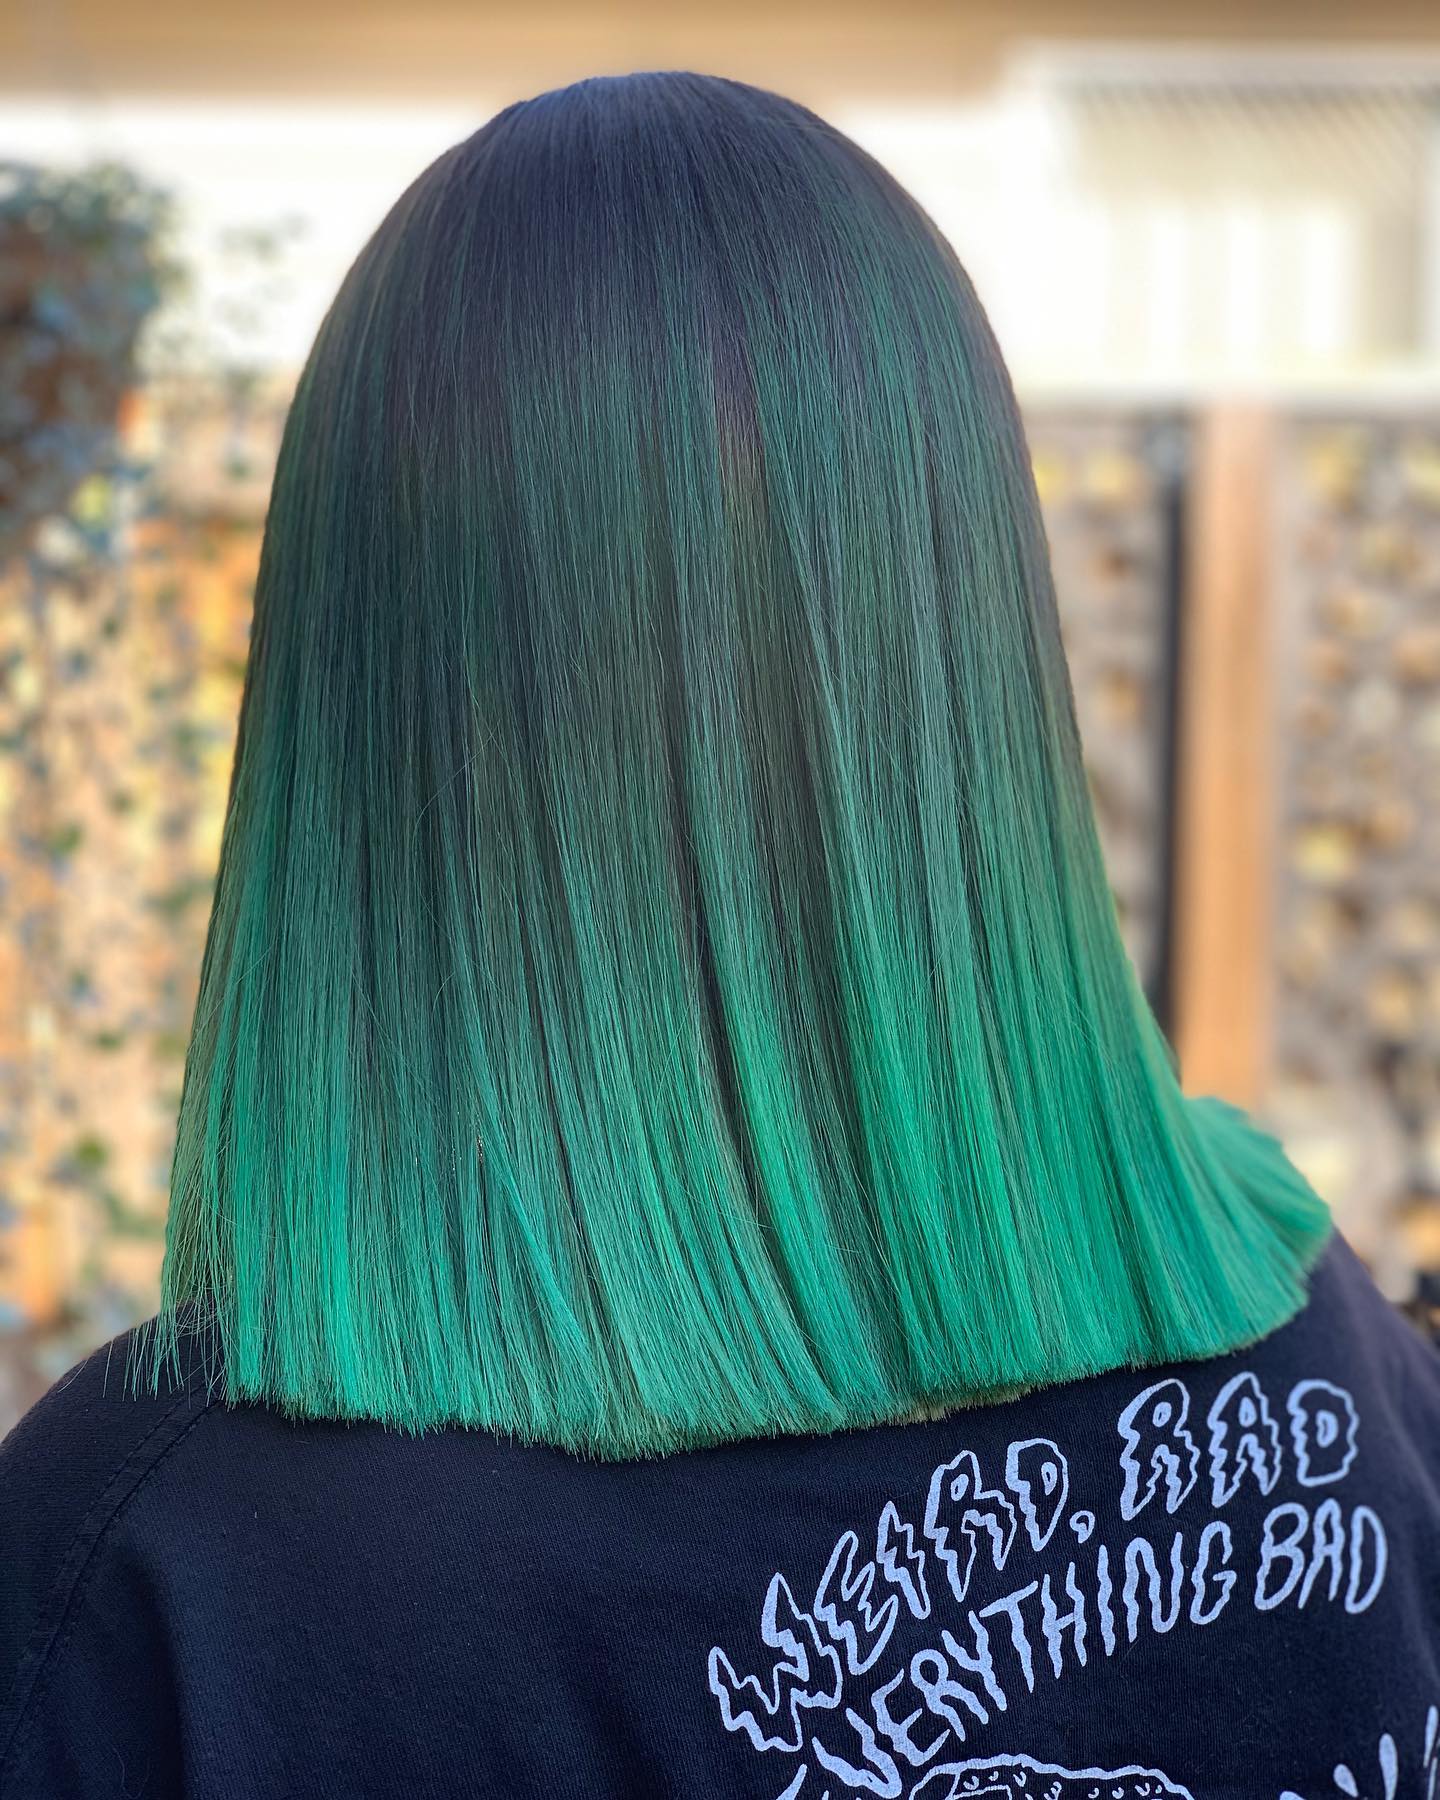 30 Best Green Ombre Hair Ideas  LoveHairStyles.com - #green